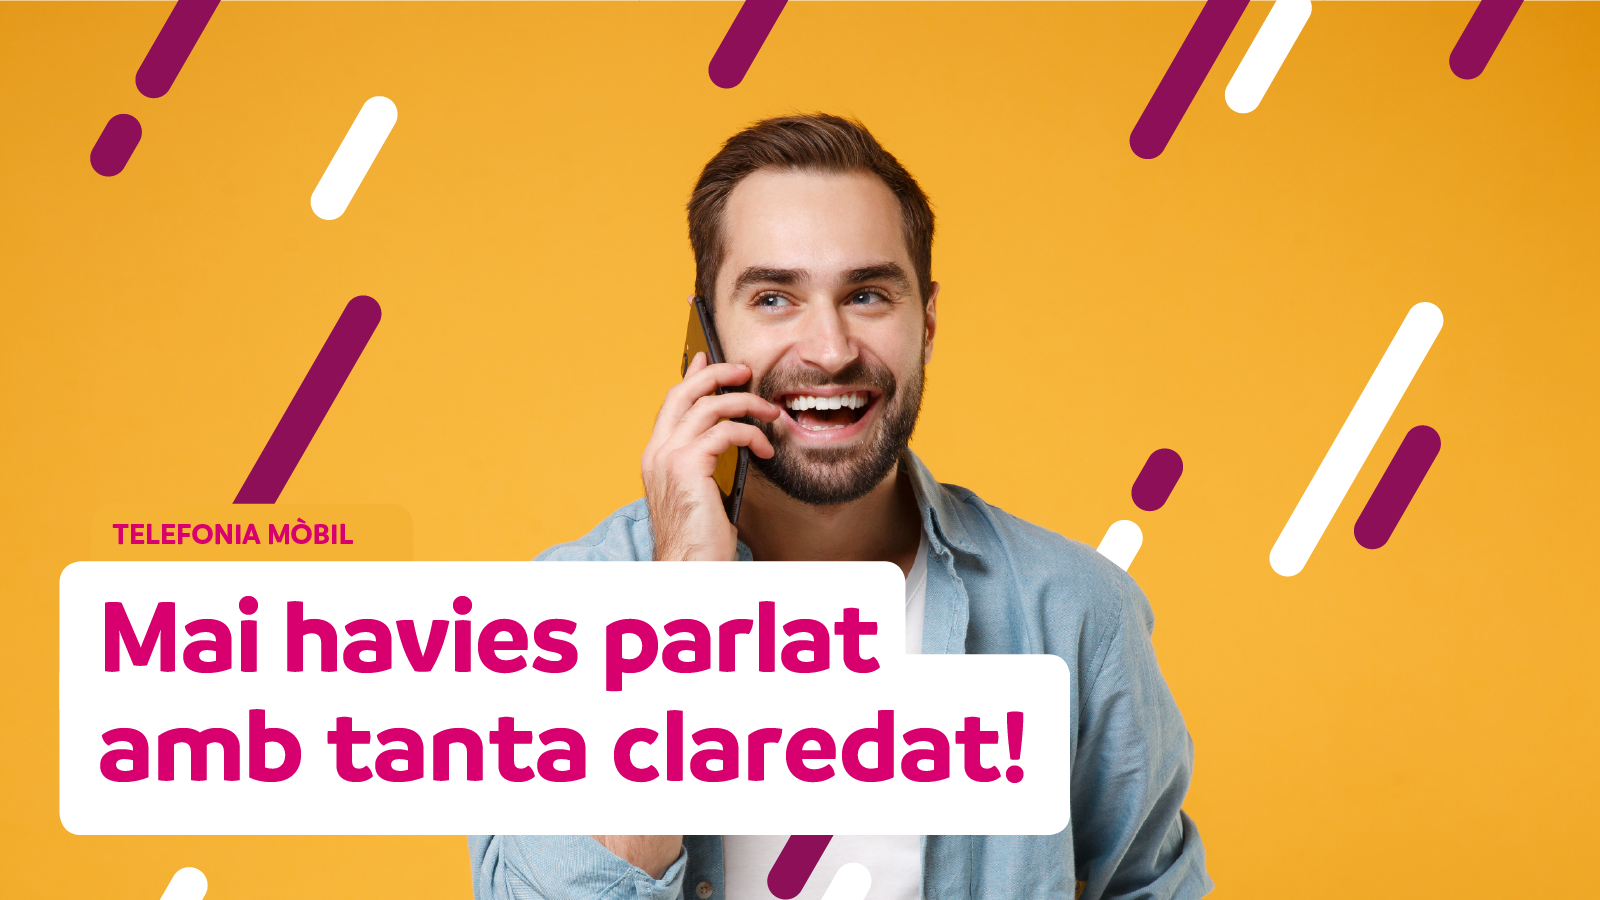 Andorra Telecom begins activating voice in HD for mobile phone customers. The new service will offer better sound quality, rapid